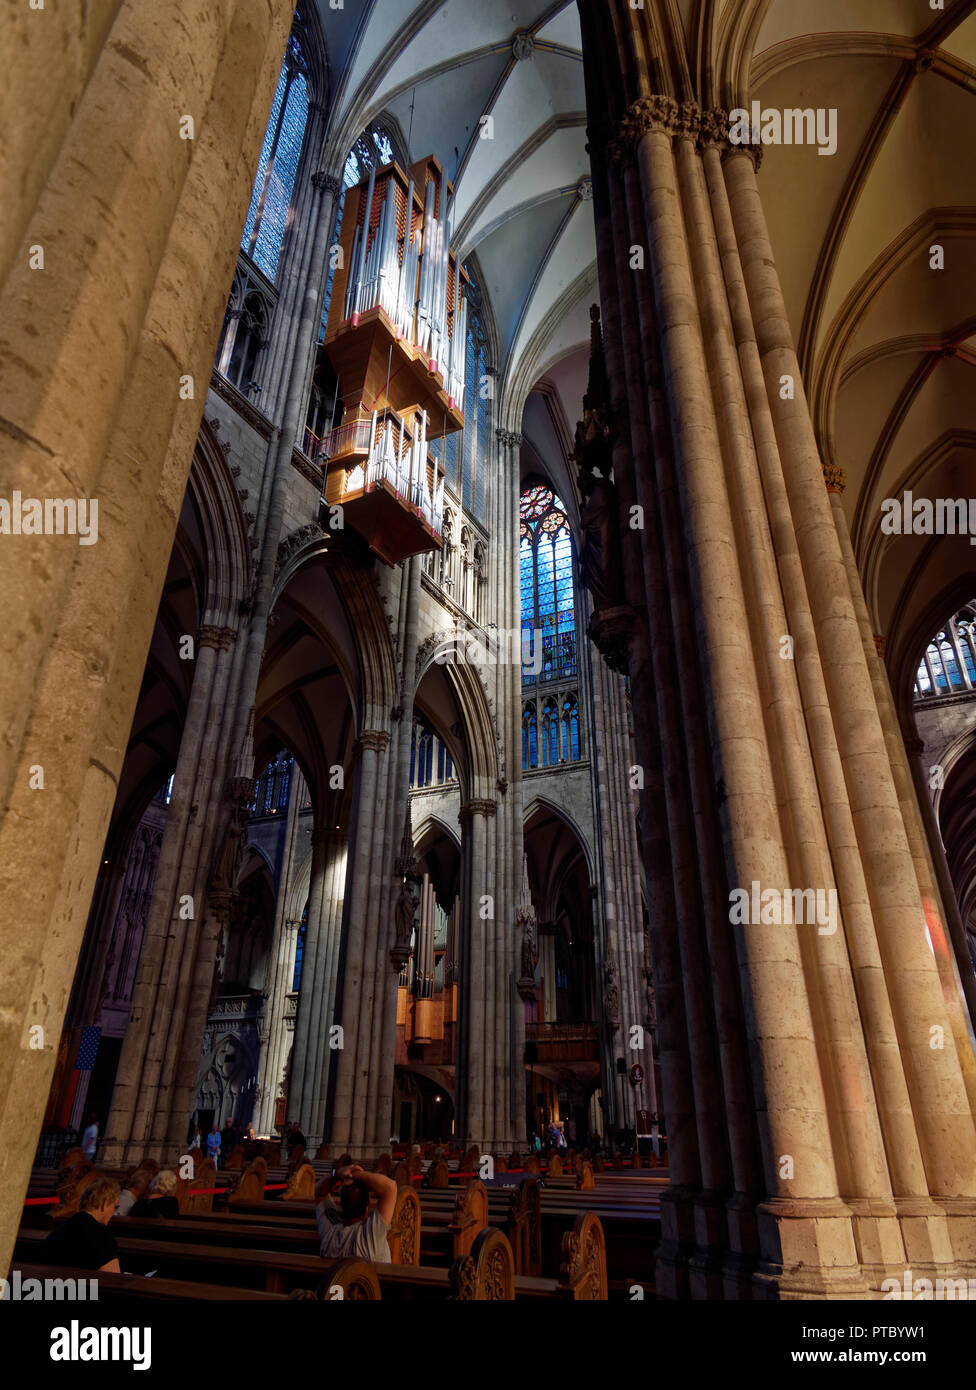 The beautiful interior of the Gothic Cathedral in Cologne City Centre, Germany Stock Photo